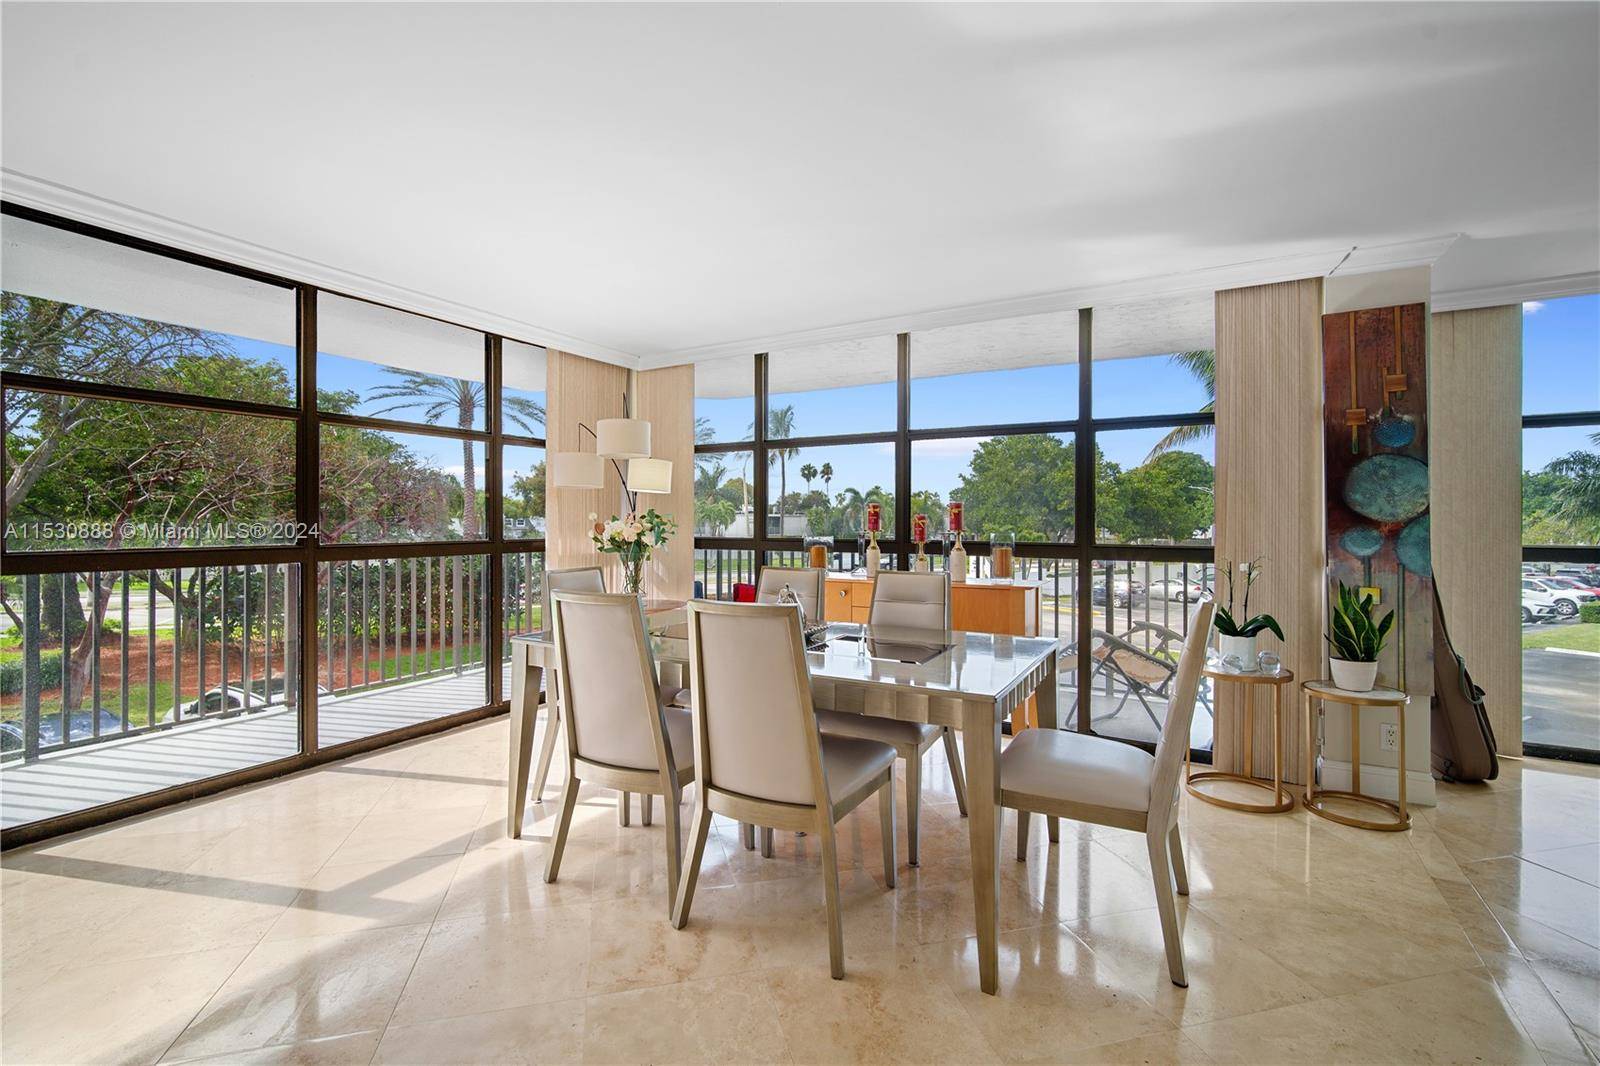 This flawless 2 2 corner unit has been completely renovated, featuring floor to ceiling windows, a wrap around balcony, and captivating tropical garden views.